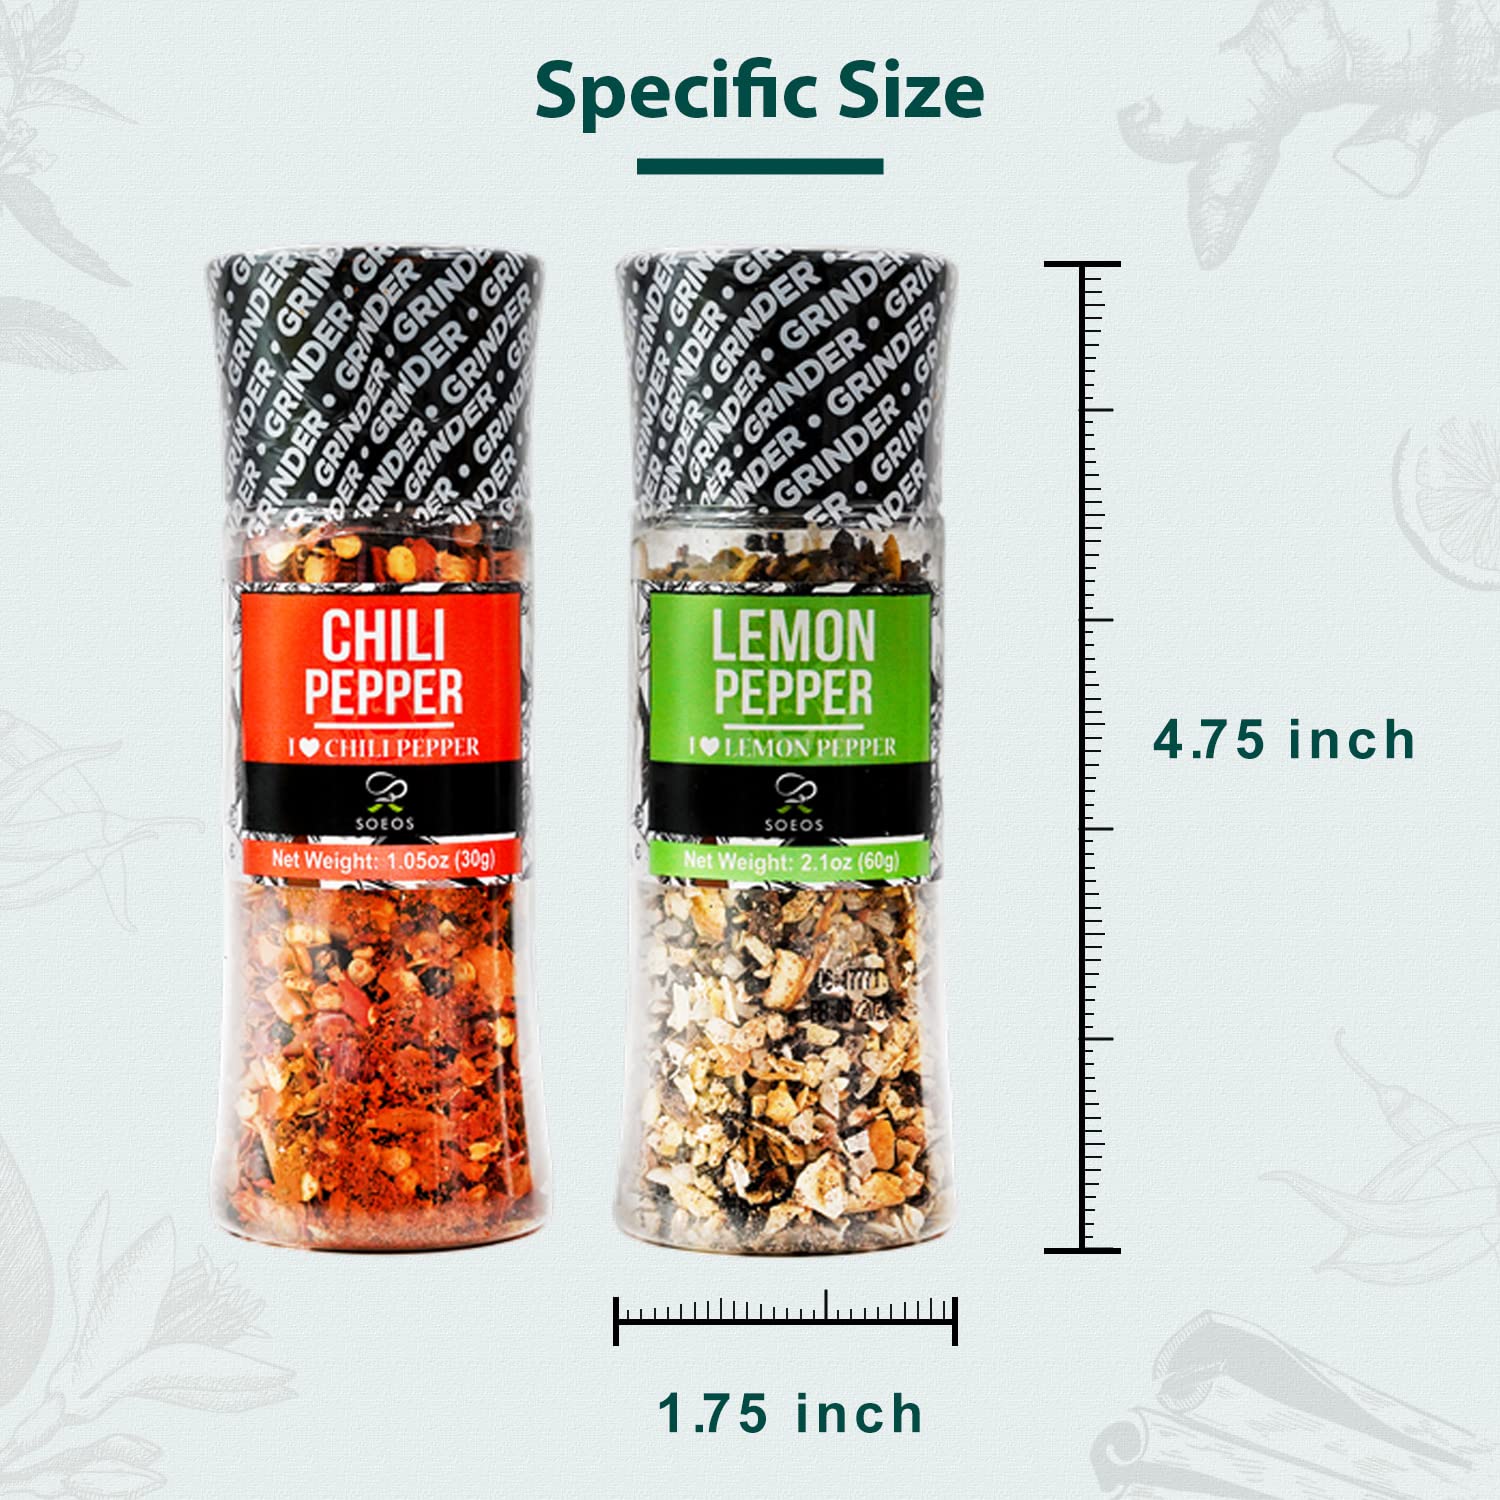  iSpice Starter Spice Set- Seasonings for Cooking